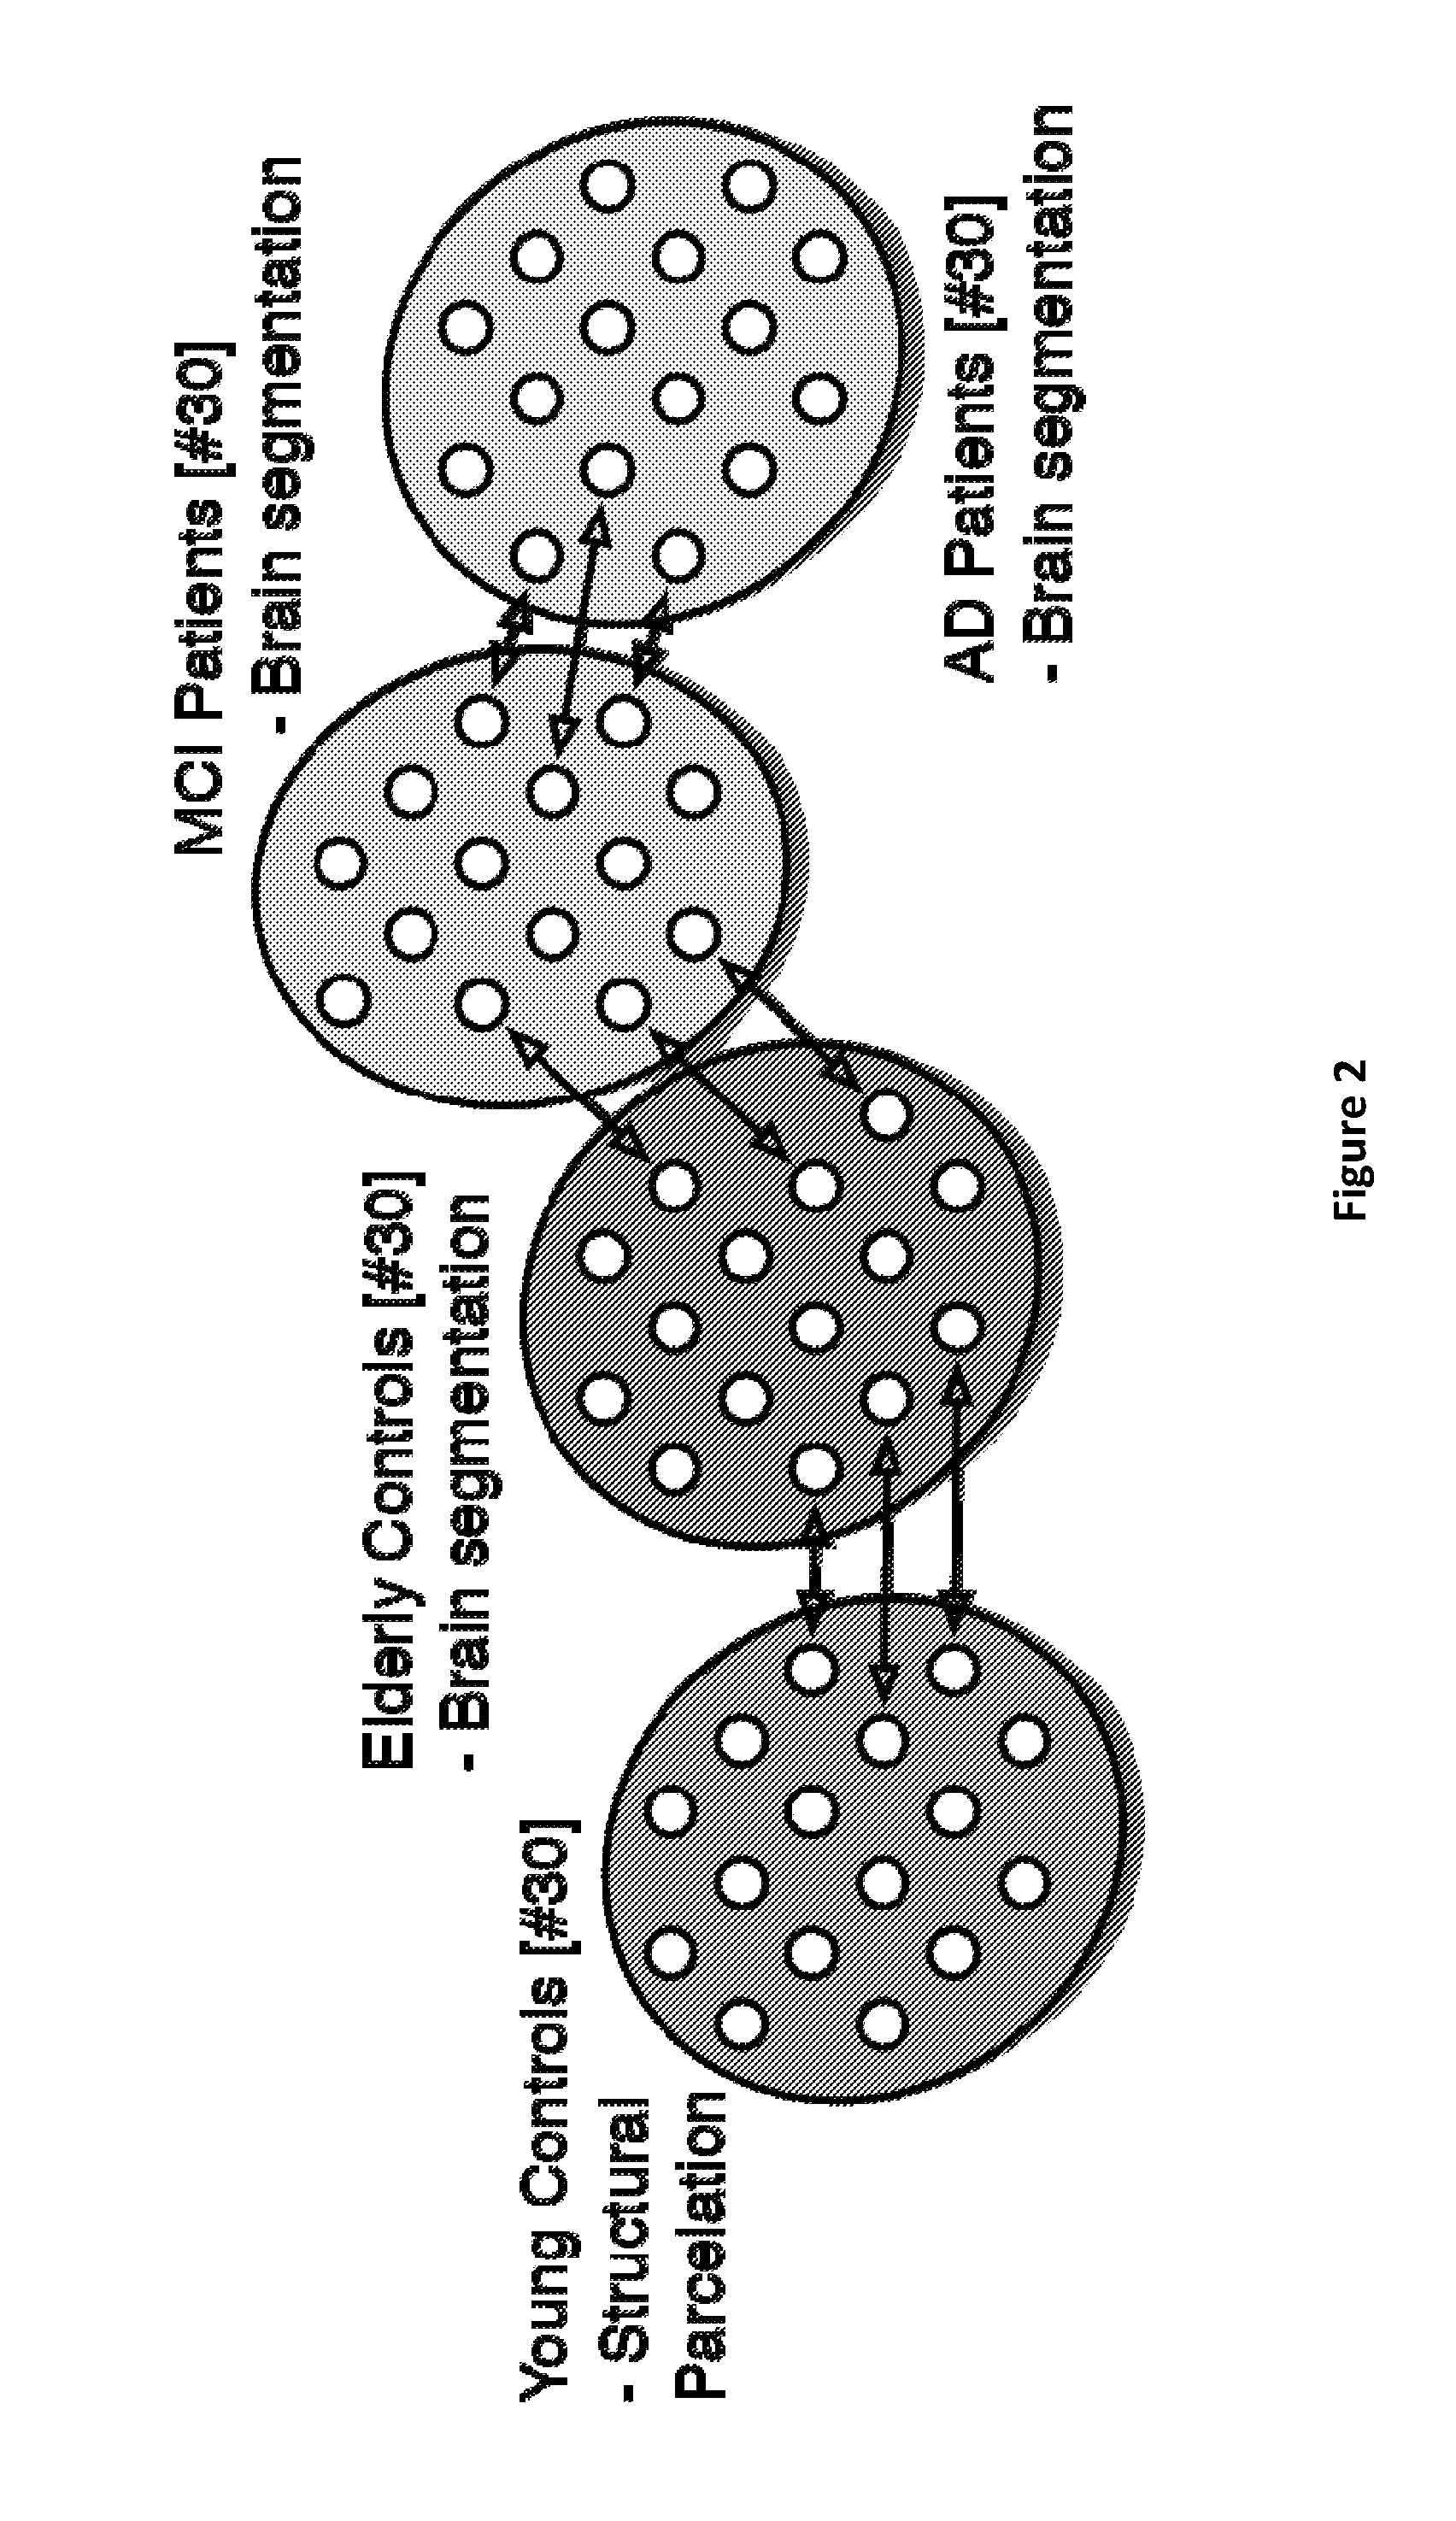 System and method for annotating images by propagating information